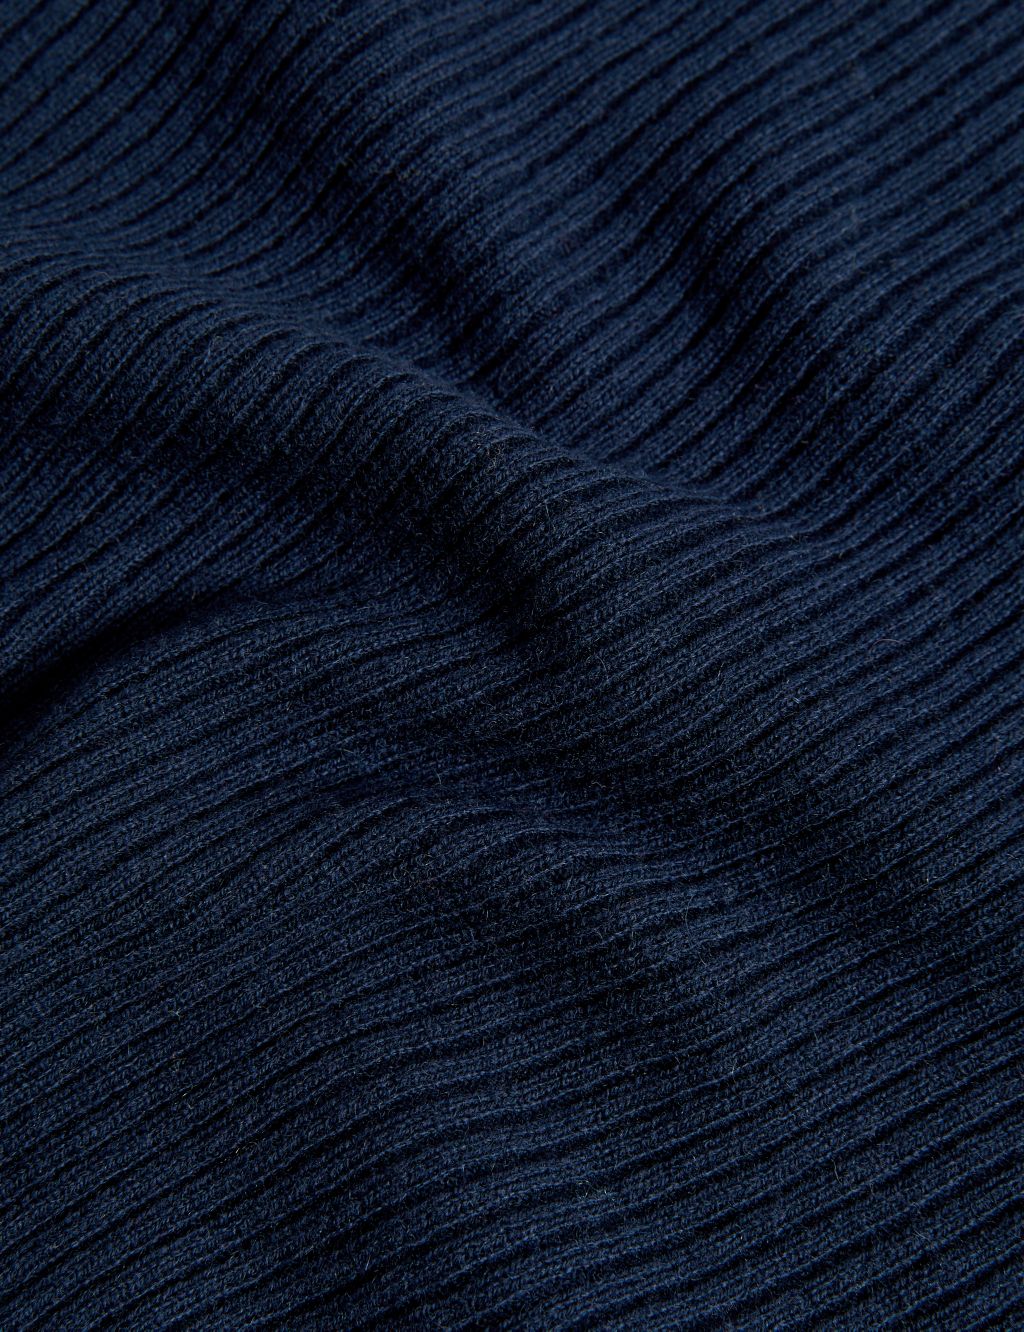 Merino Wool with Cashmere Collared Jumper image 6